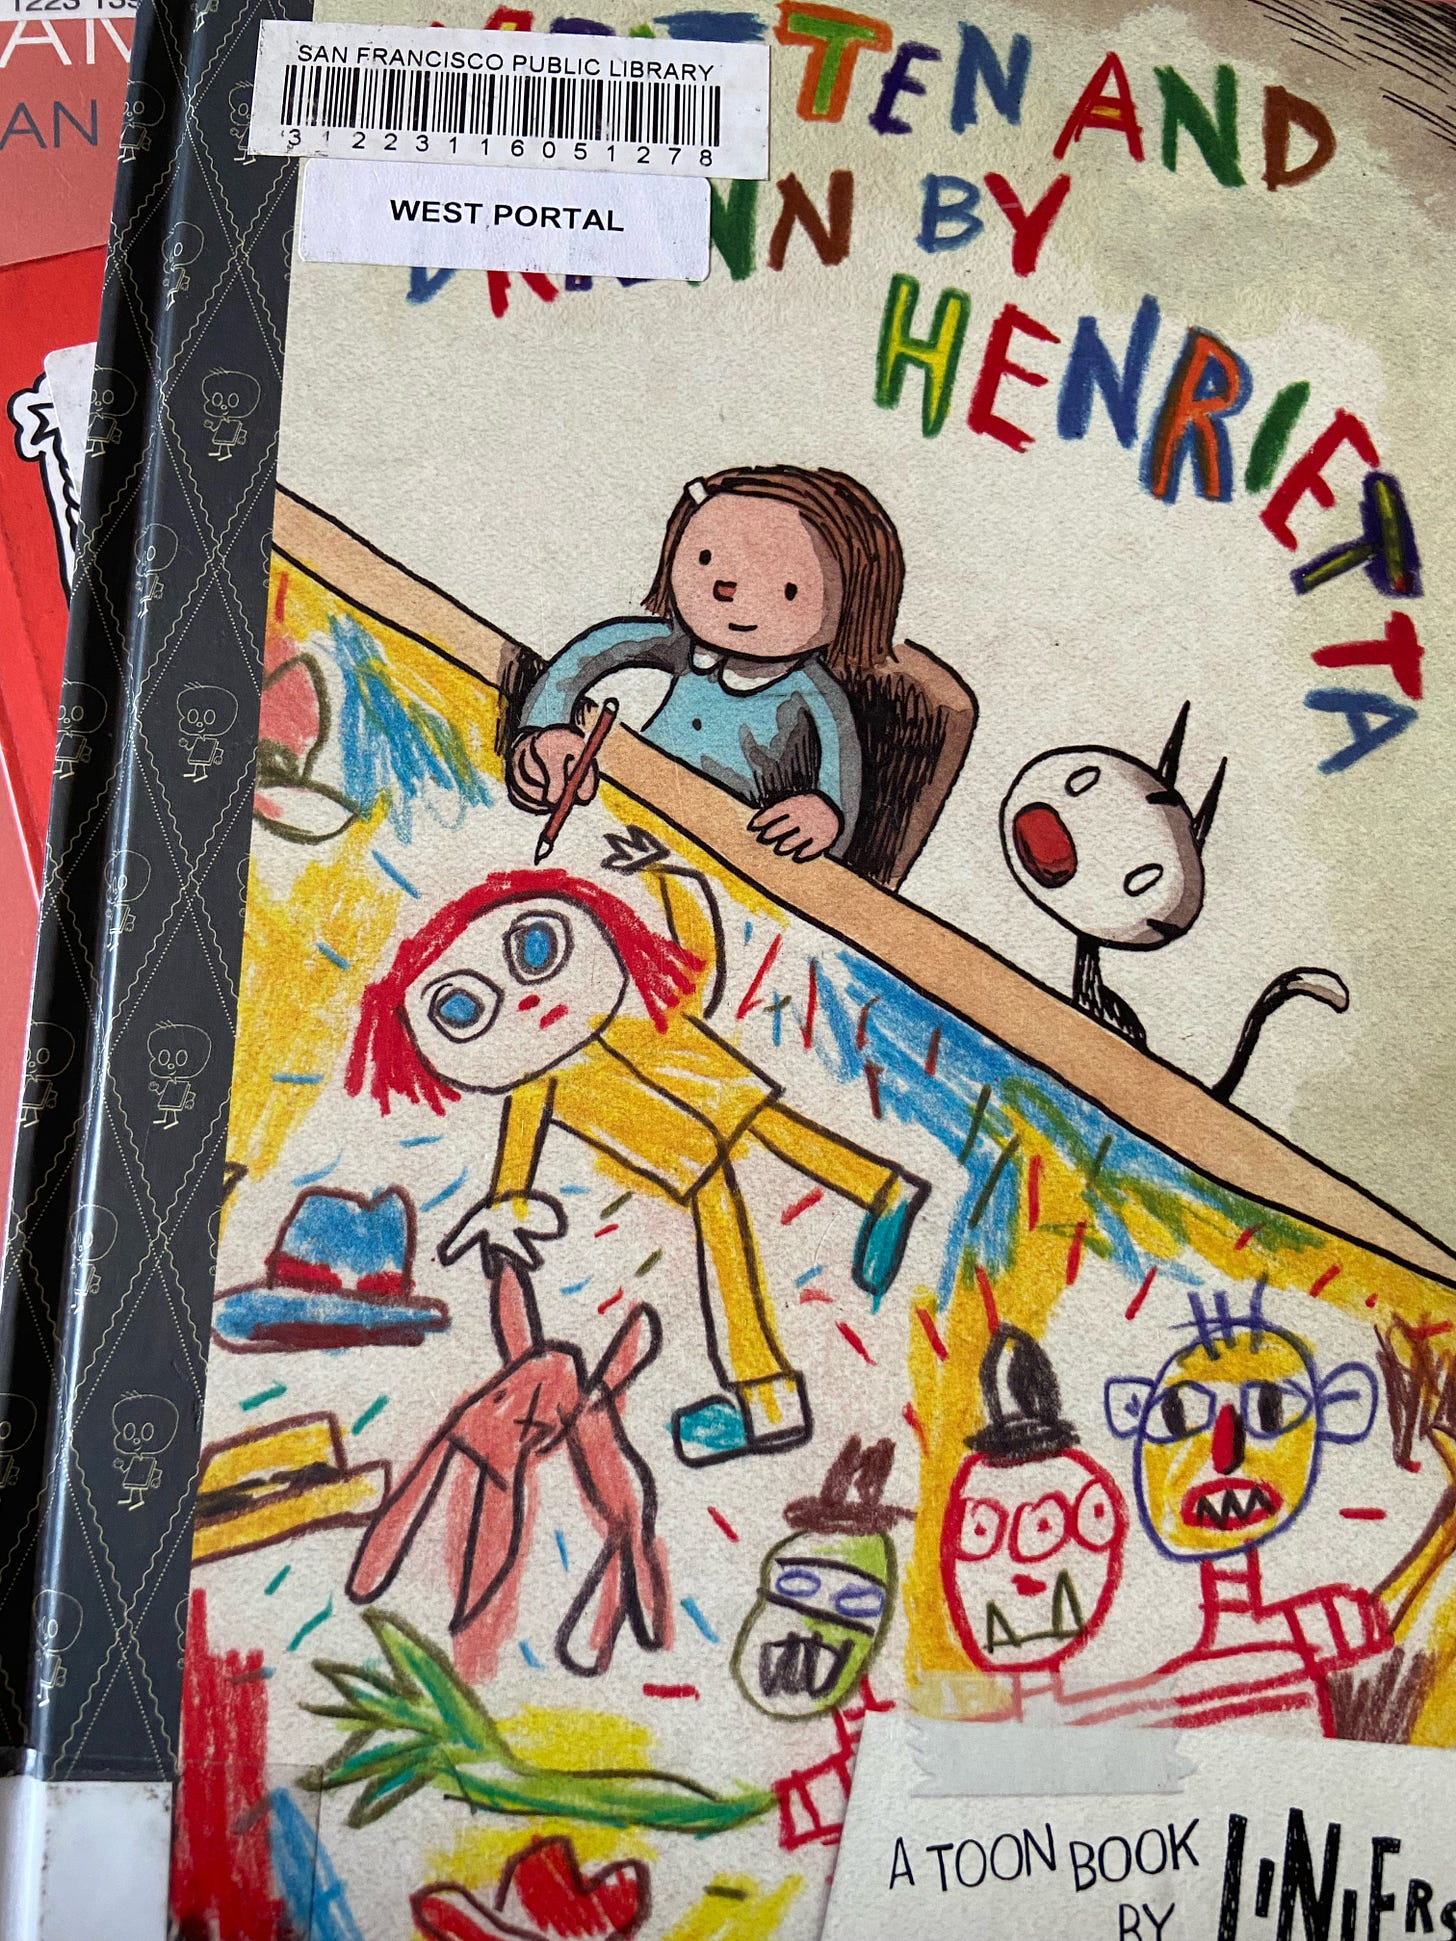 Written and Drawn by Henrietta cover